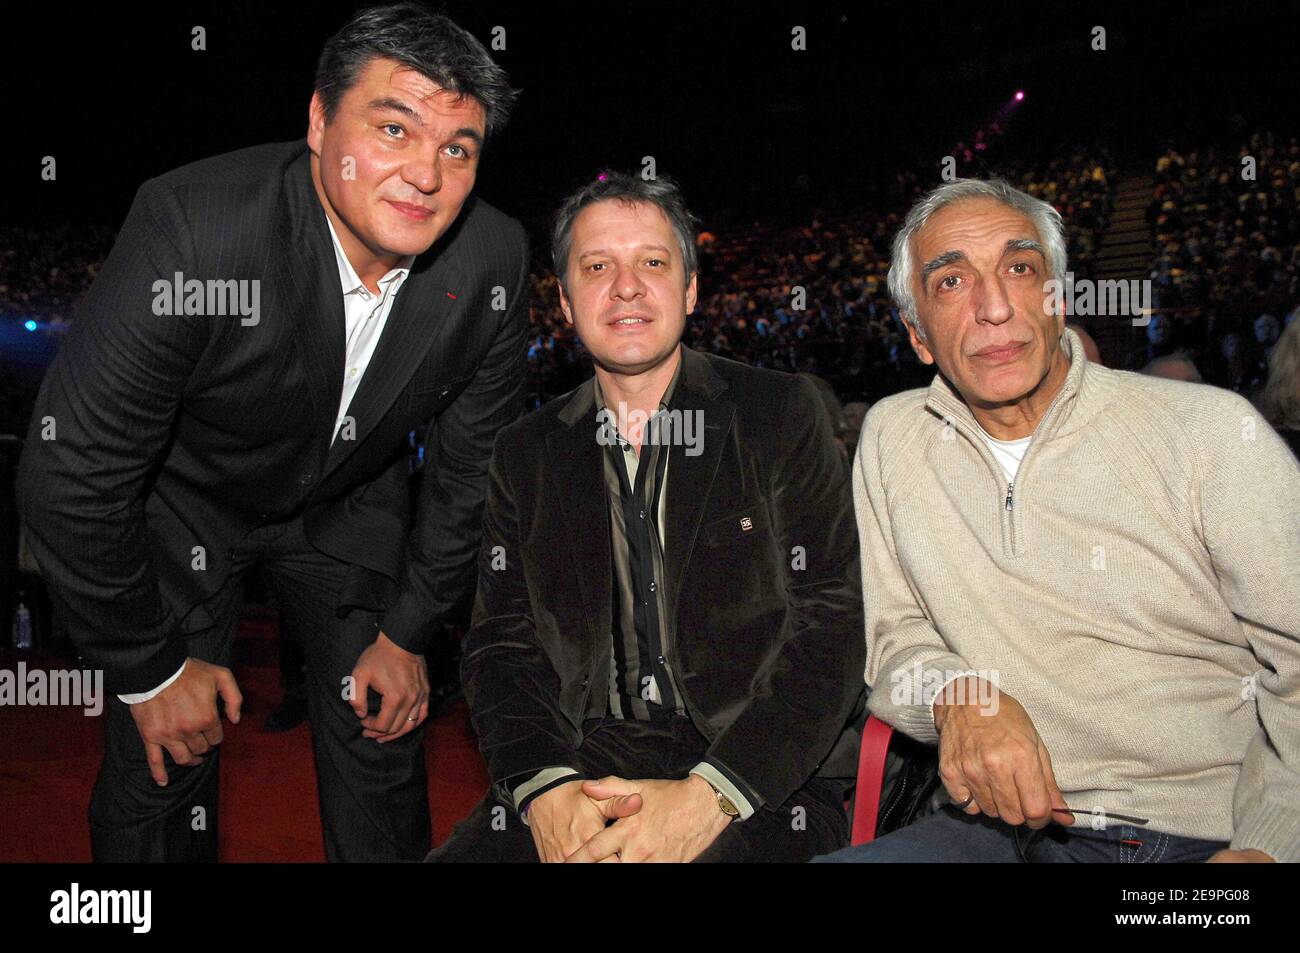 French Former judo Olympic champion David Douillet,Thierry Rey and actor Gerard Darmon attend the WBA international light flyweigh at the Palais Omnisports Paris-Bercy in Paris, France on December 2, 2006. Photo by Nicolas Gouhier/Cameleon/ABACAPRESS.COM Stock Photo